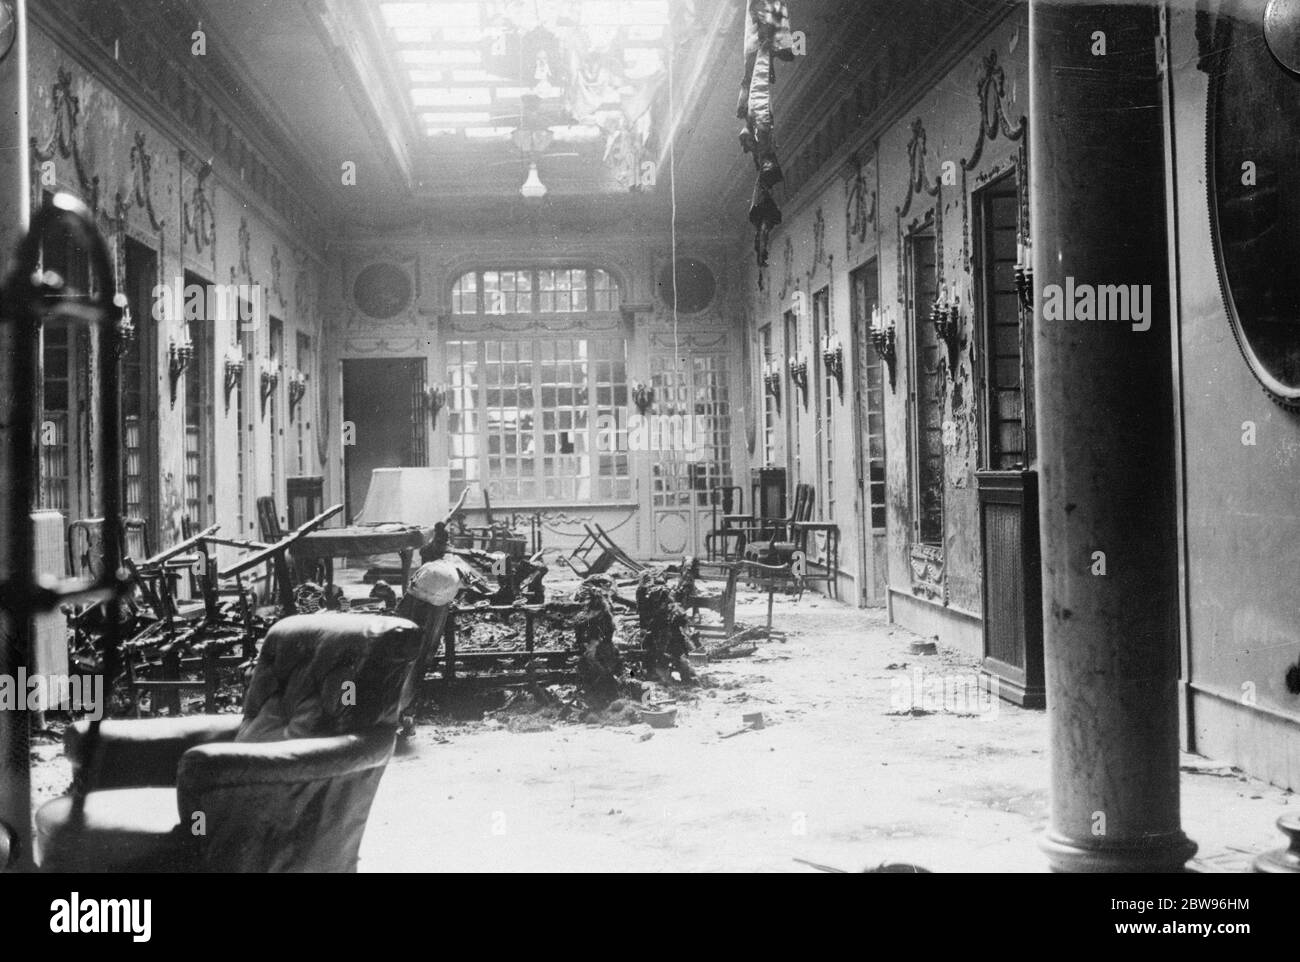 Republican mobs fire monarchist strongholds in Seville . The palace Casa Blanca the property of the Marquis de Esquival in Seville , which was looted and and then destroyed by fire by Republican mos after the Monarchists revolt had been put down in Seville . The palace was allowed to burn itself out . 14 August 1932 Stock Photo